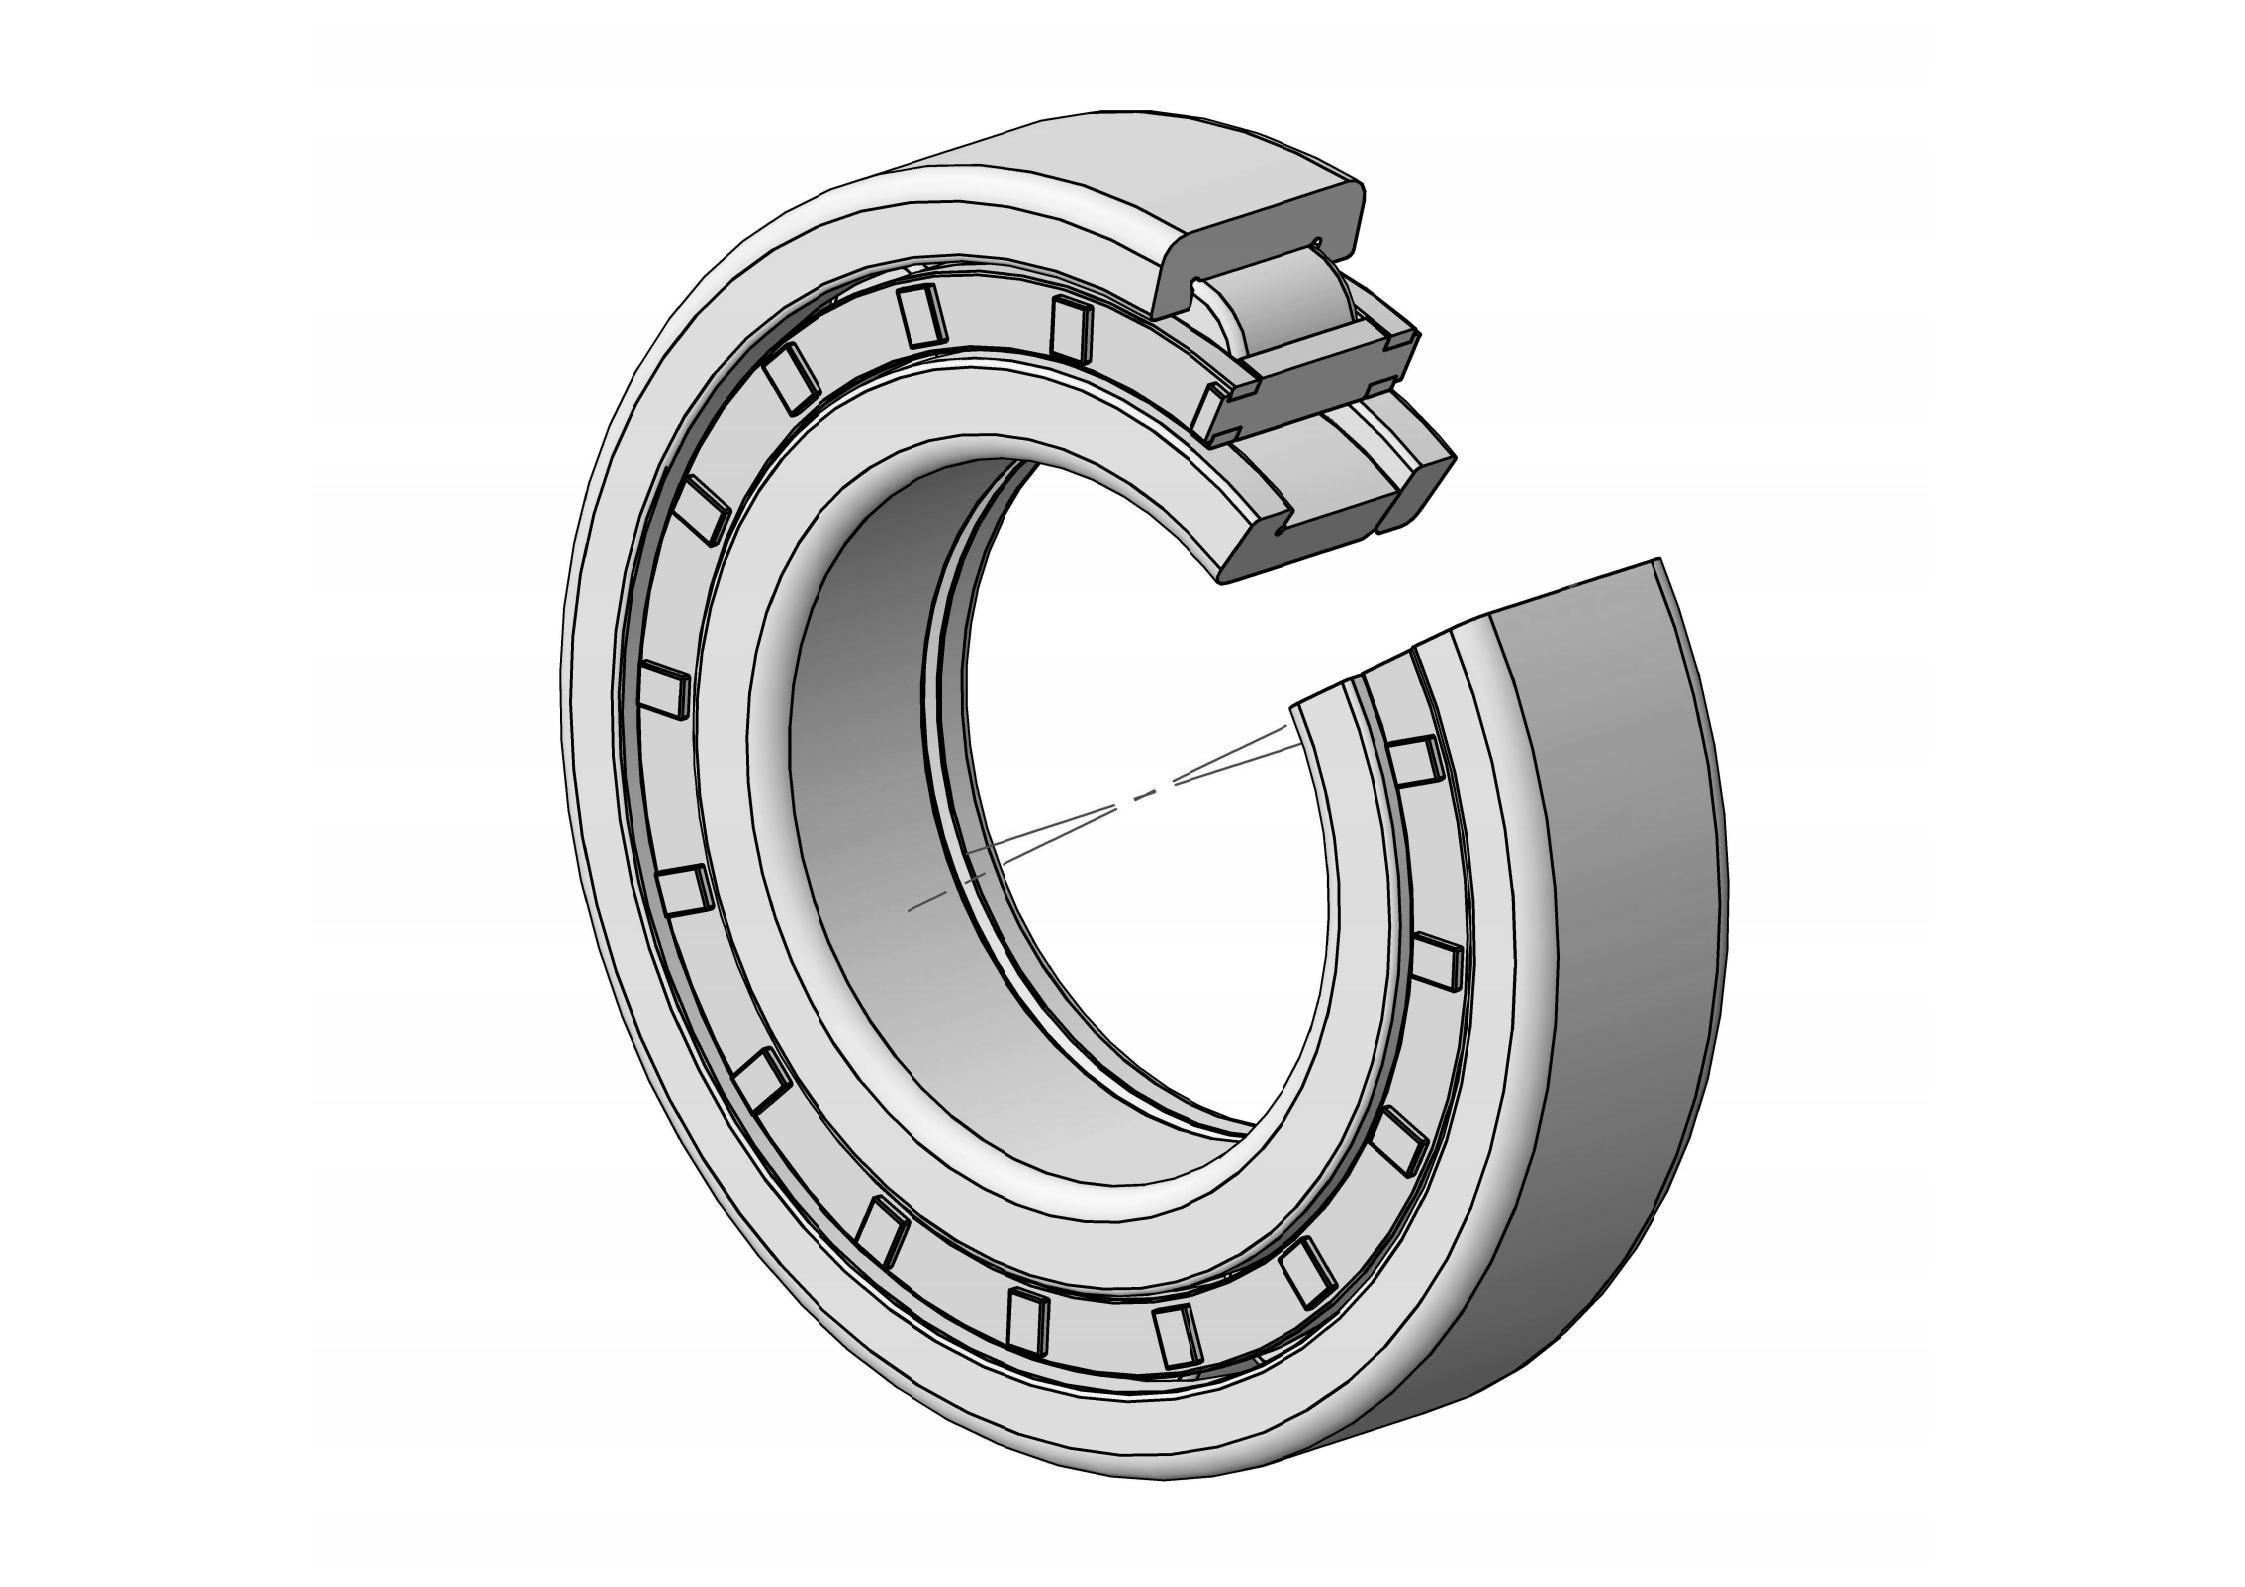 NUP212-E Single Row Cylindrical roller bearing 